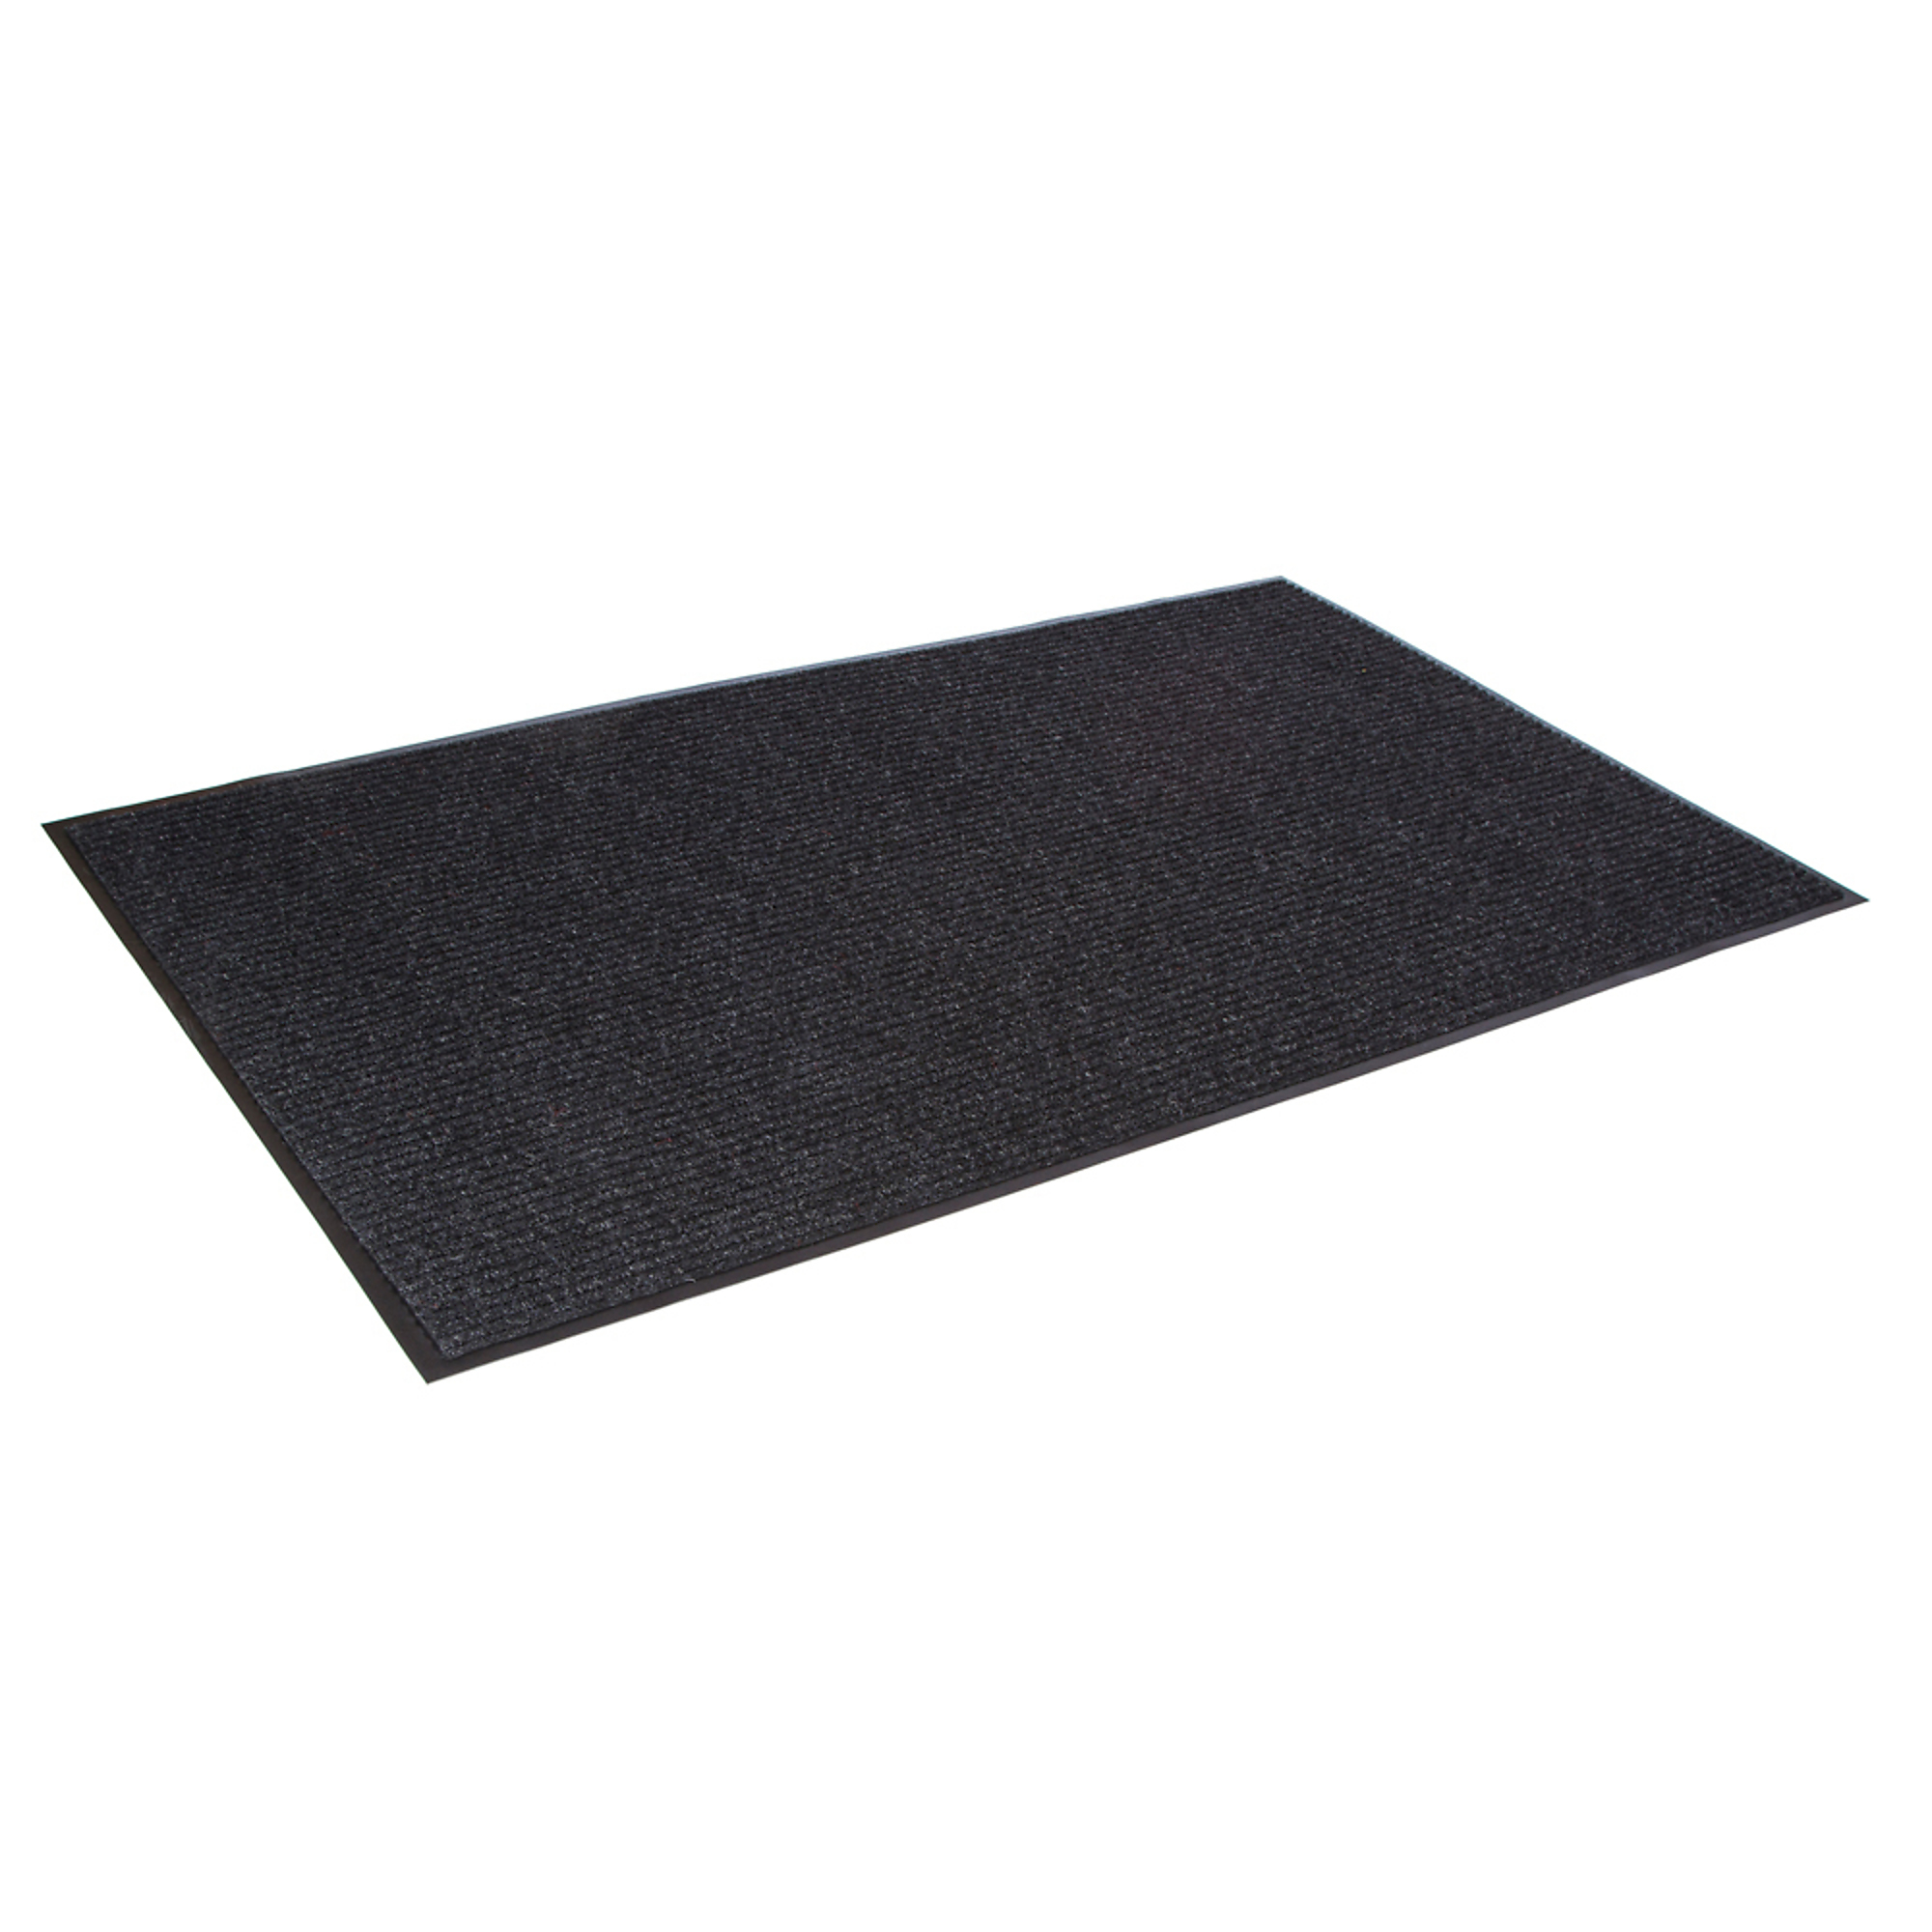 Crown Matting Technologies, Needle-Rib 4ft.x10ft. Charcoal, Width 48 in, Length 120 in, Thickness 5/16 in, Model NR 0410CH